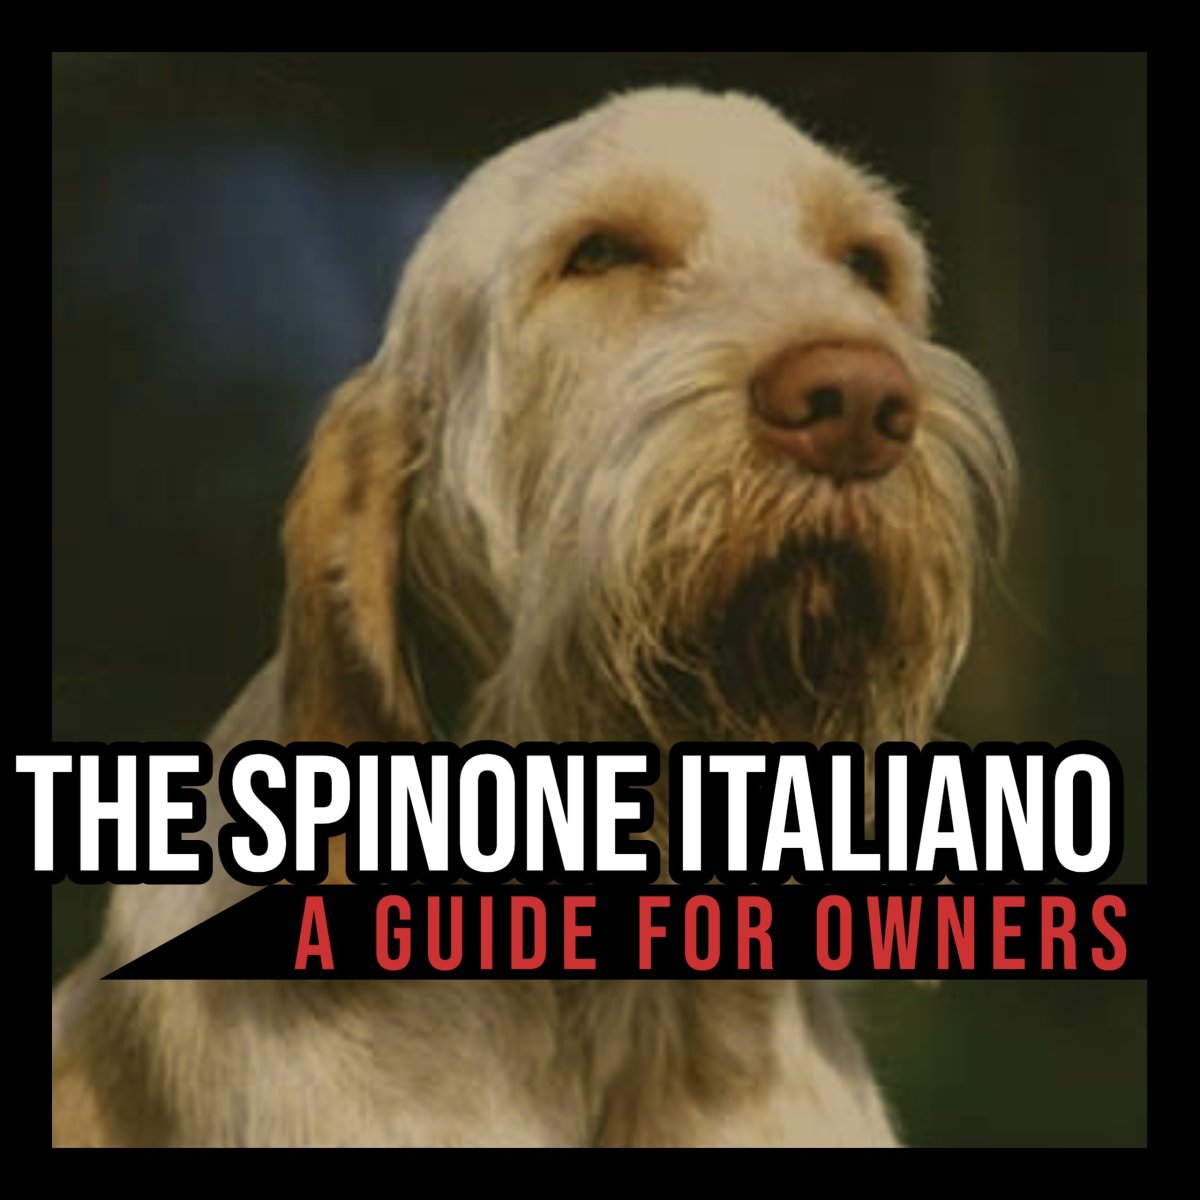 The Spinone Italiano: A Guide for Owners